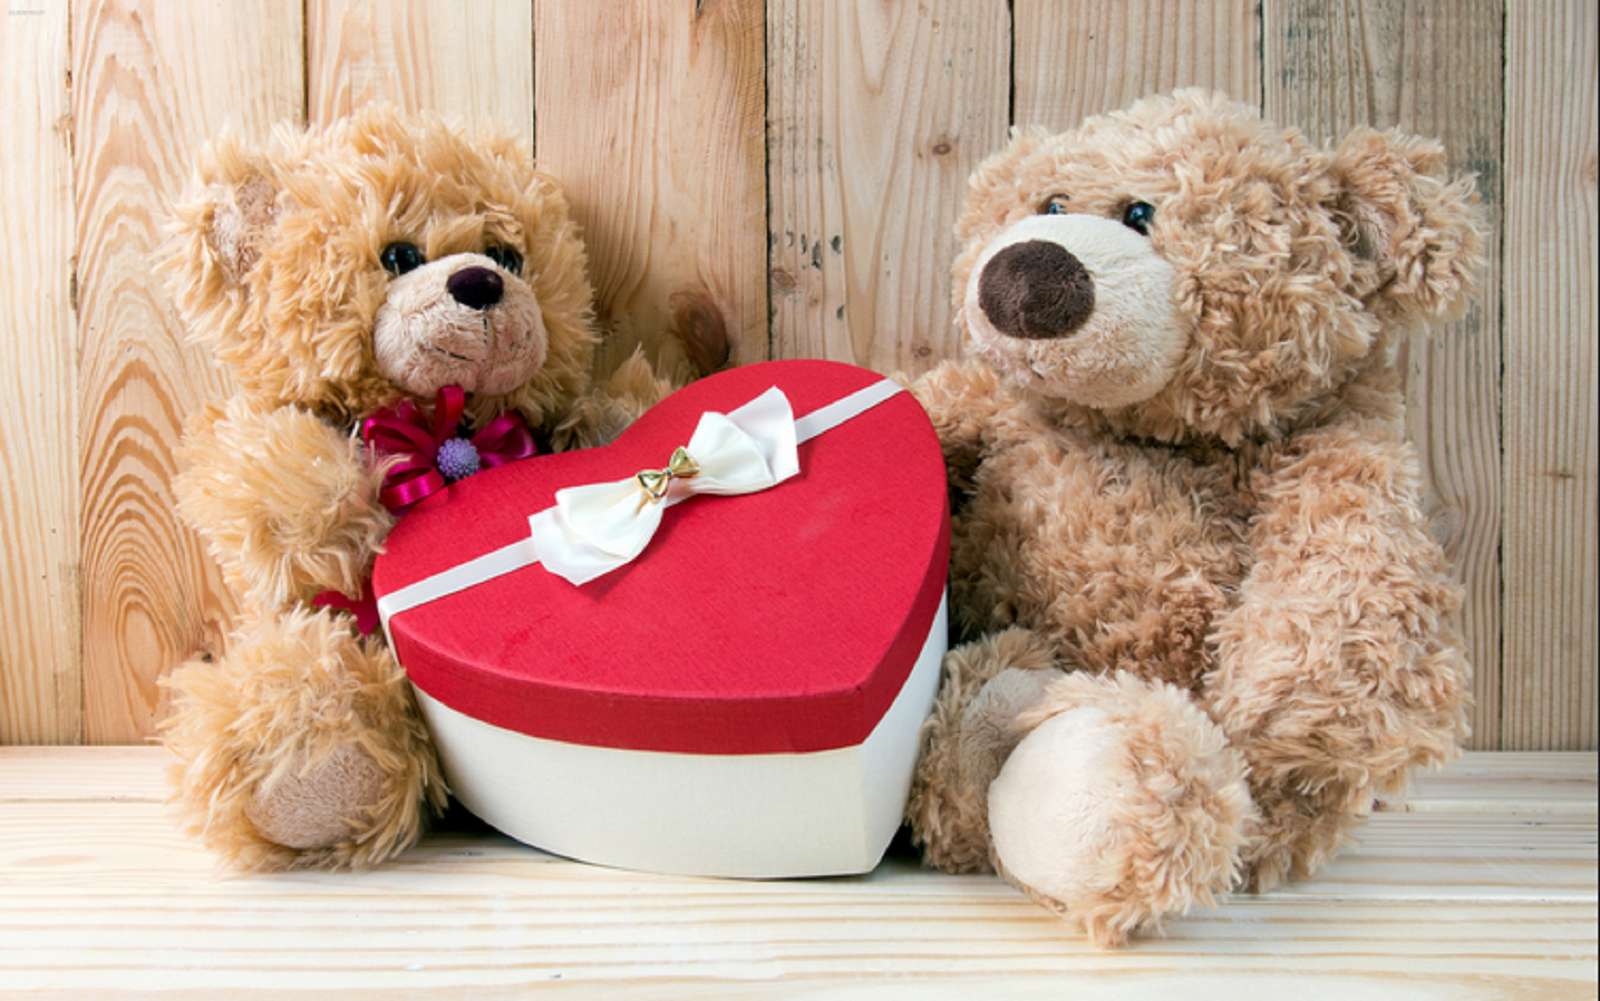 Valentine's Day gifts - two teddy bears jigsaw puzzle online